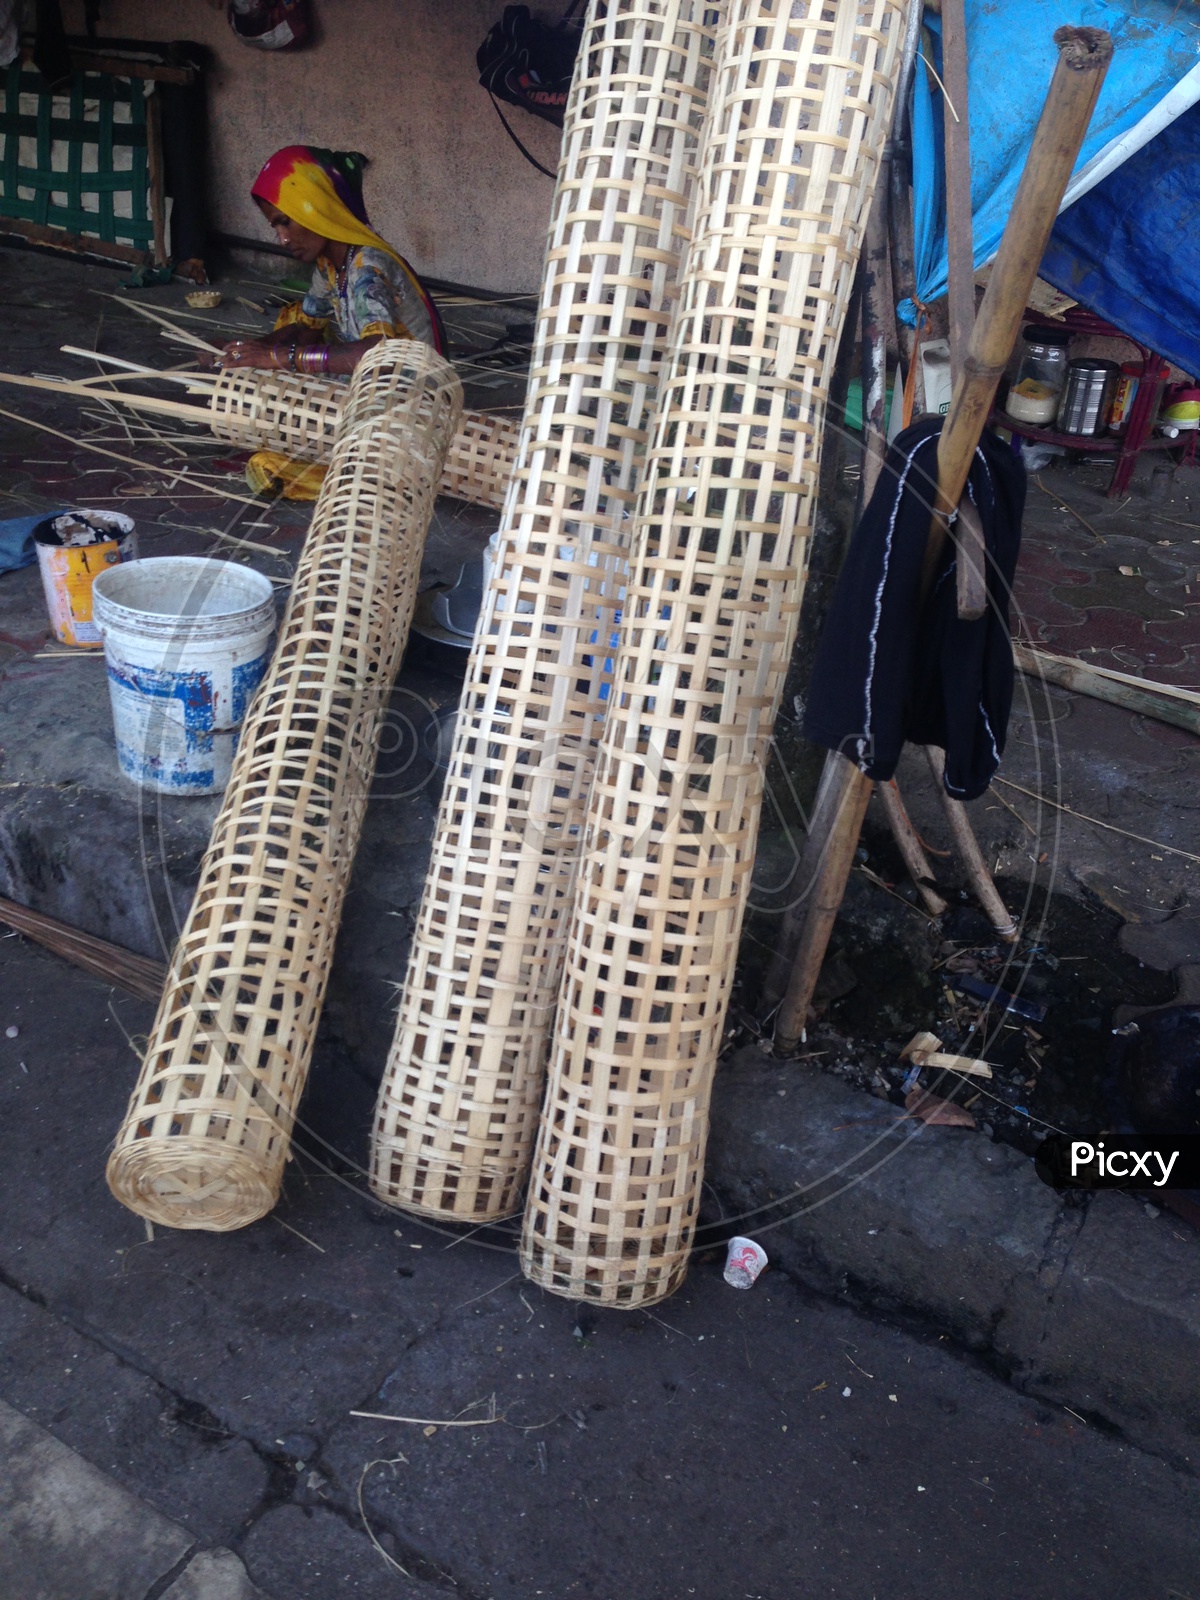 Handicrafts Out of Bamboo